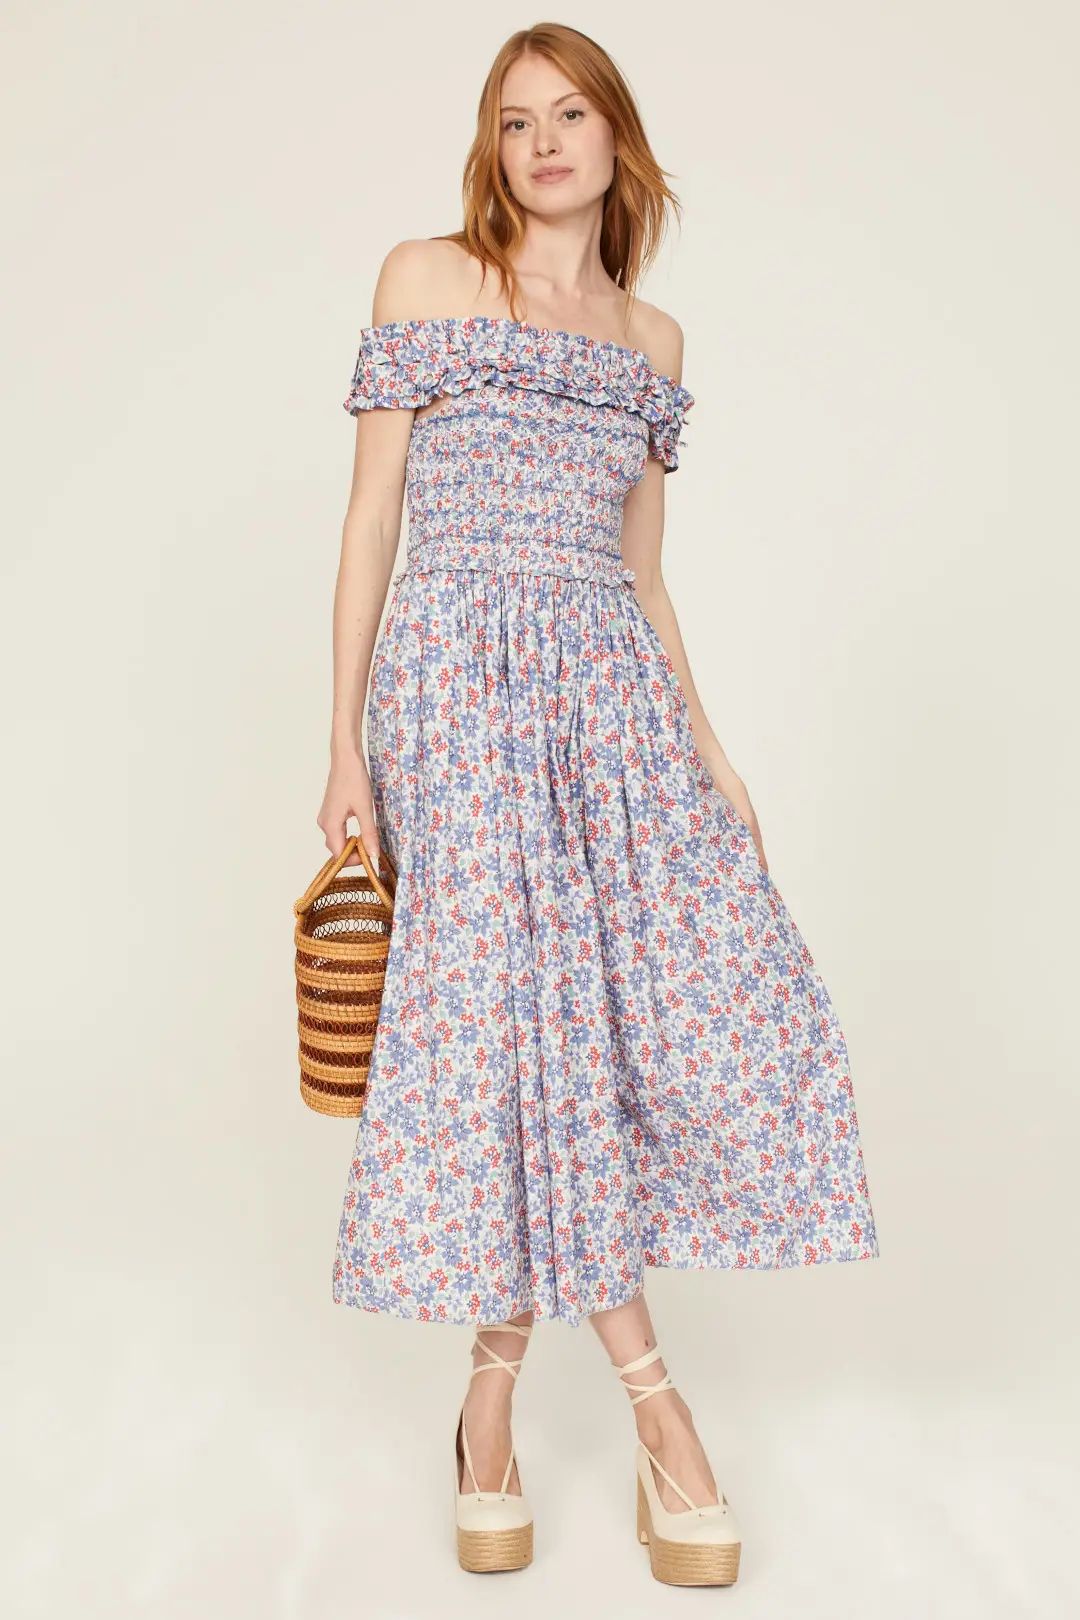 Peggy Dress | Rent the Runway